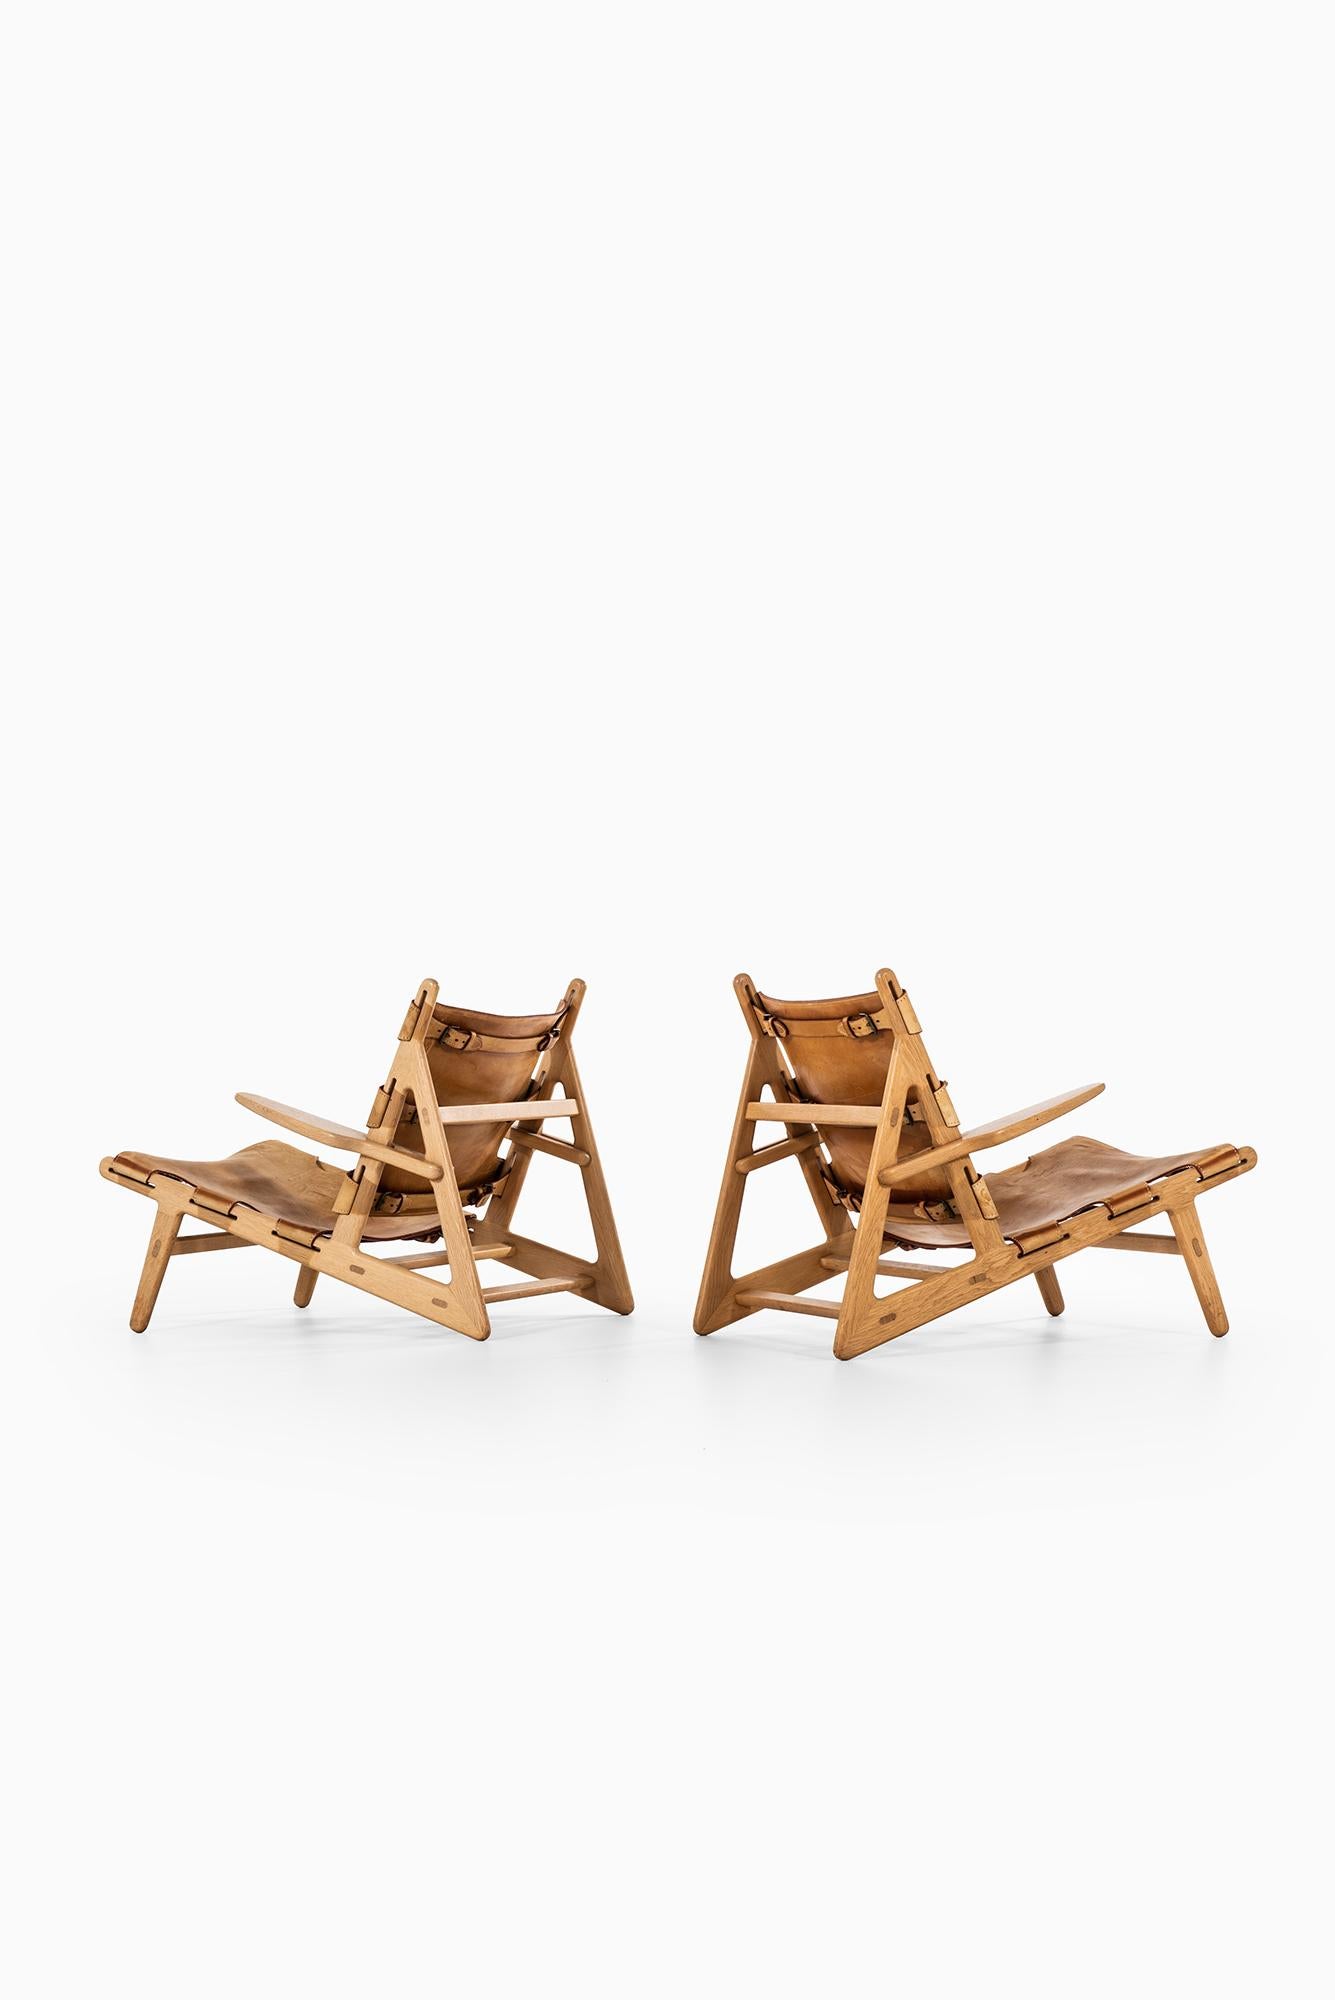 Leather Børge Mogensen Hunting Easy Chairs by Fredericia Stolefabrik in Denmark